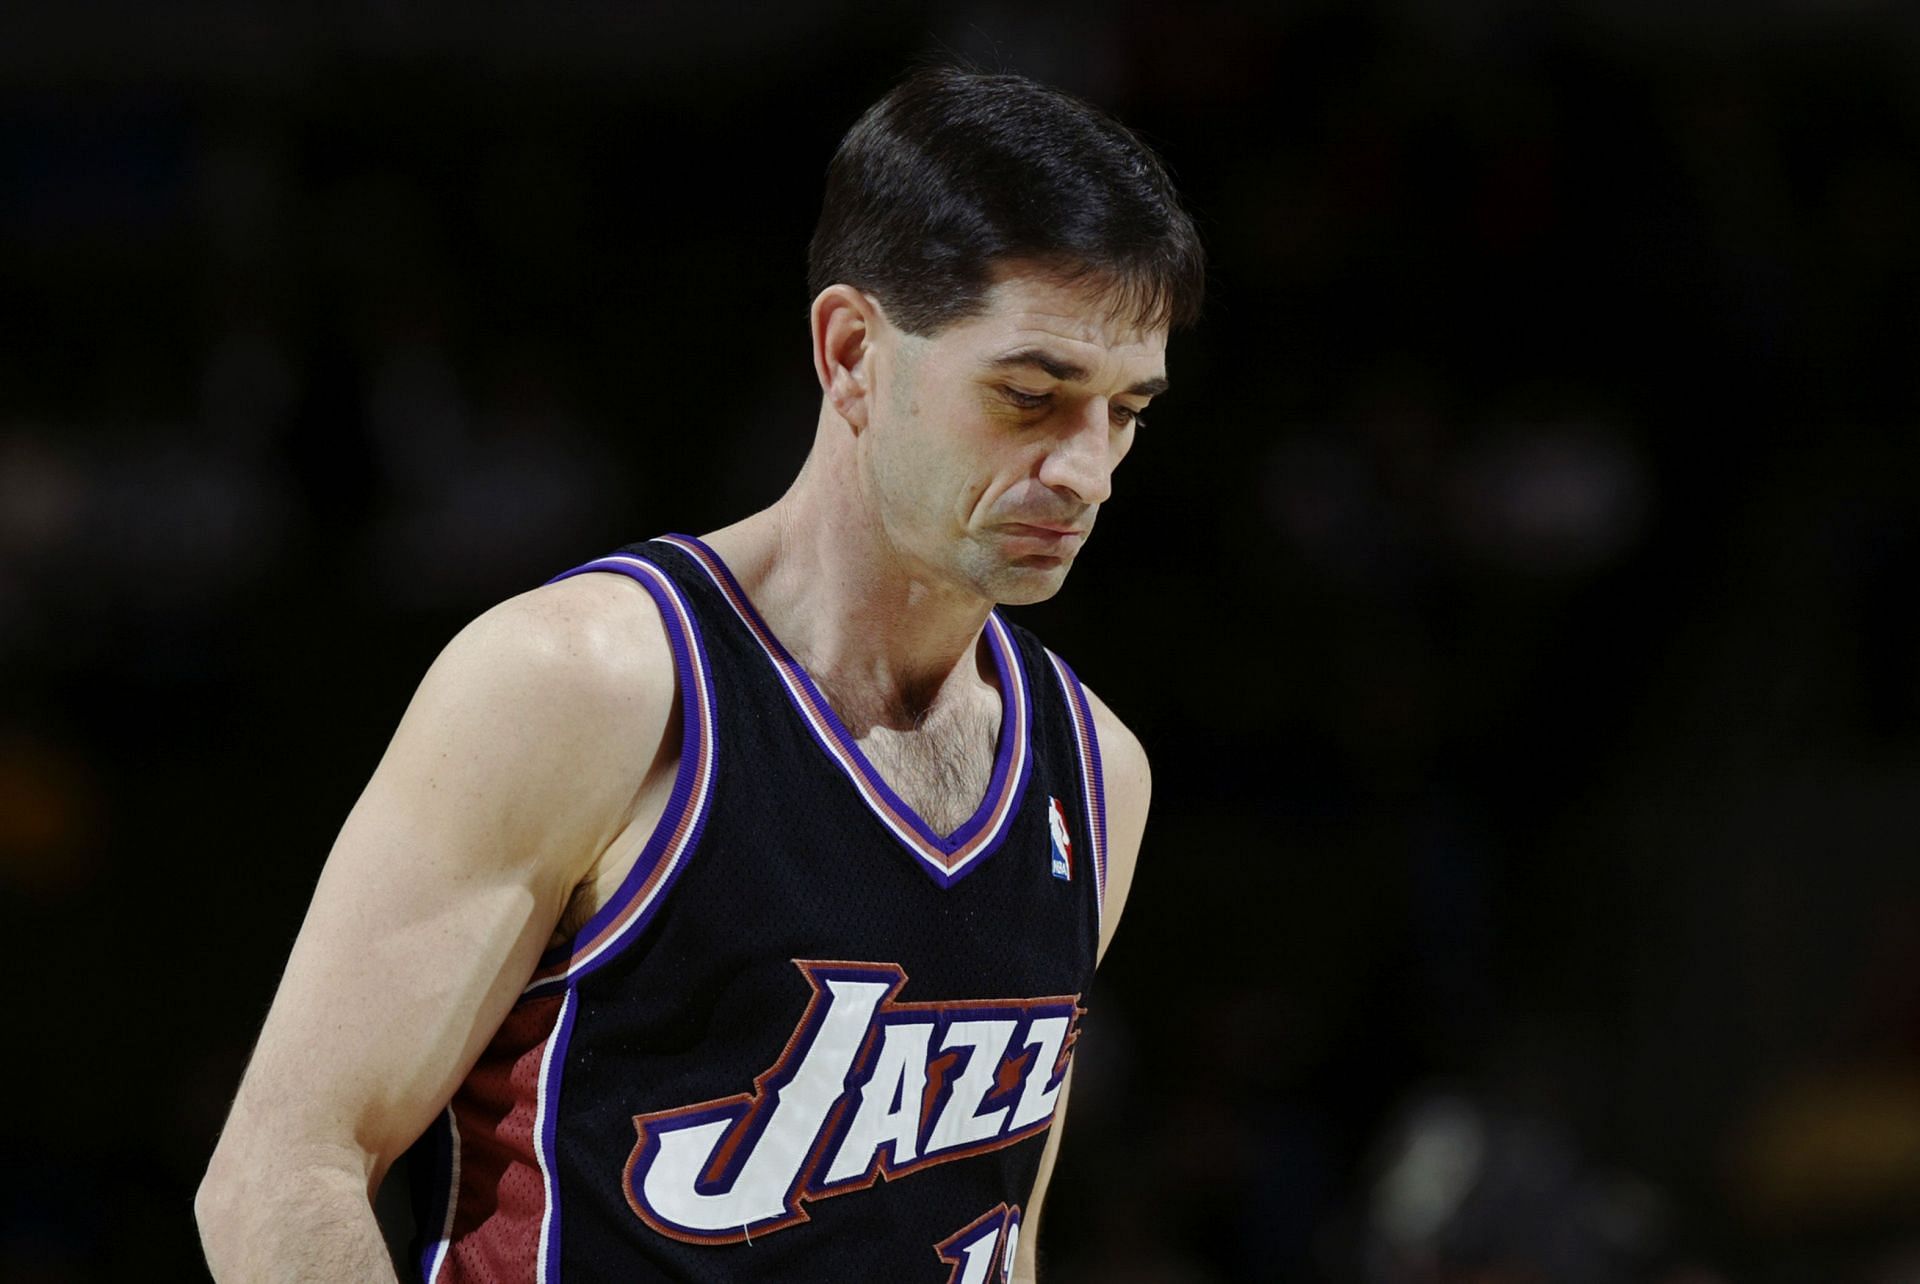 John Stockton is one of the greatest point guards in NBA history.